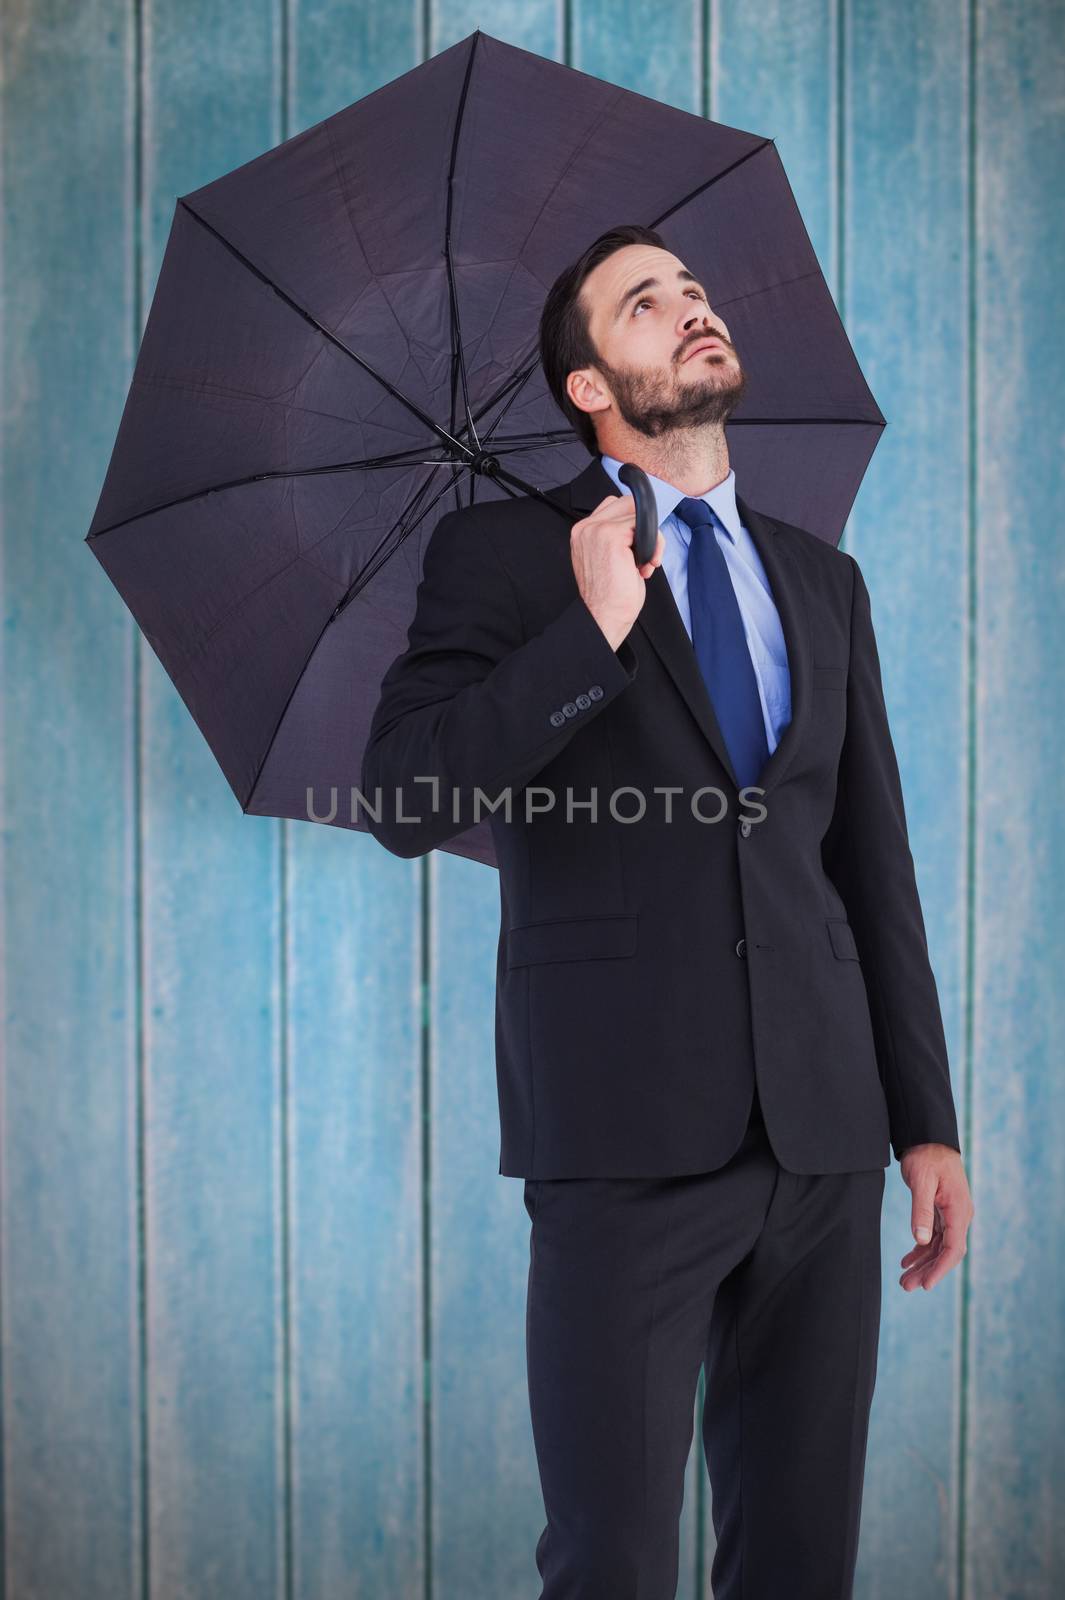 Composite image of businesswoman in suit holding umbrella while looking up by Wavebreakmedia